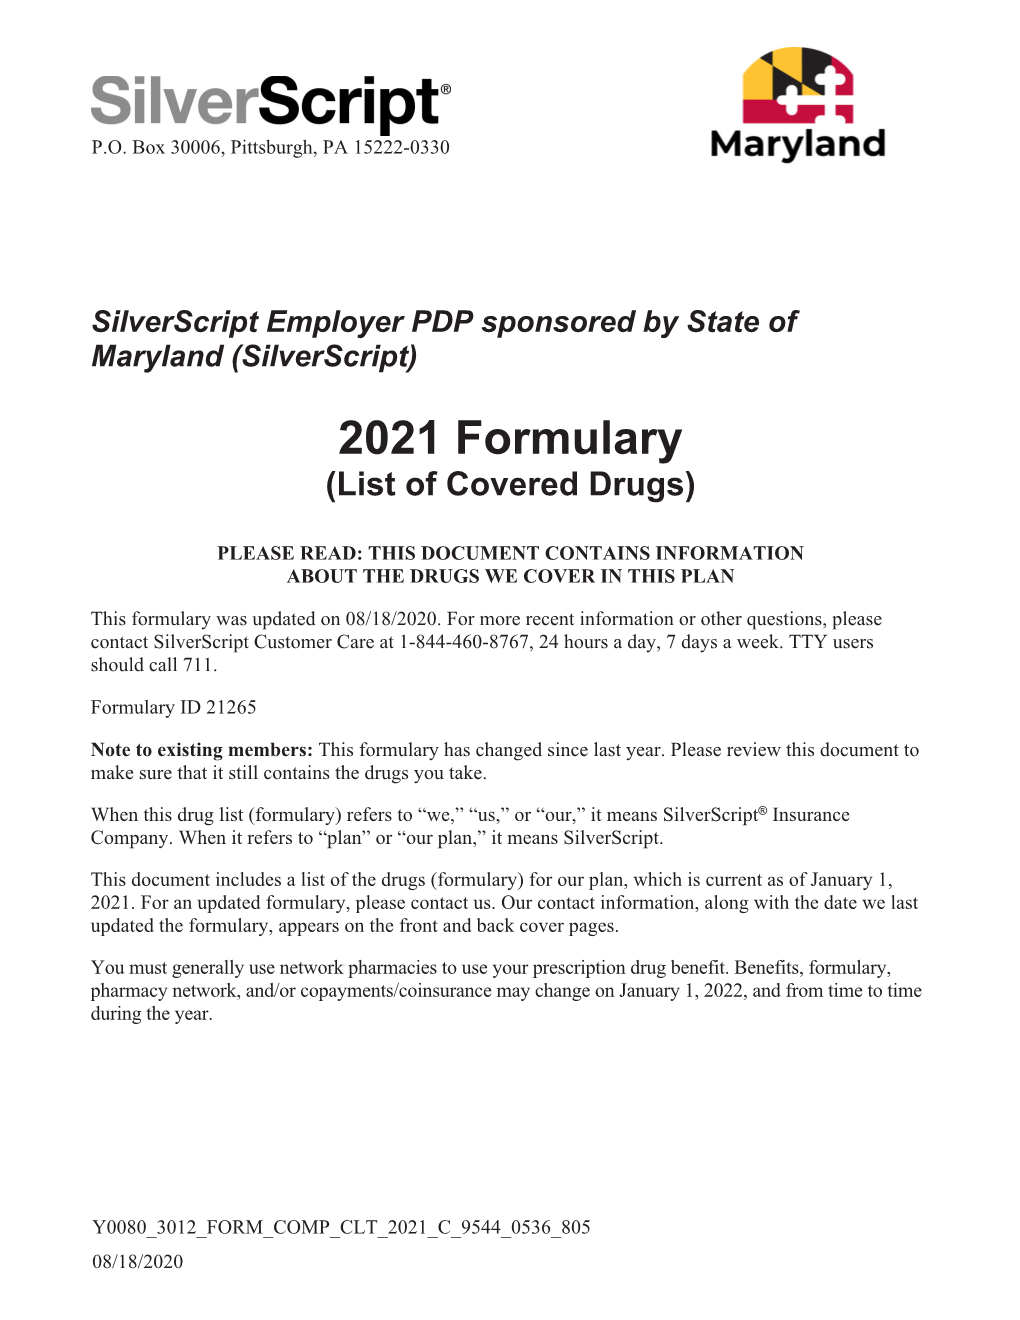 2021 Formulary (List of Covered Drugs)